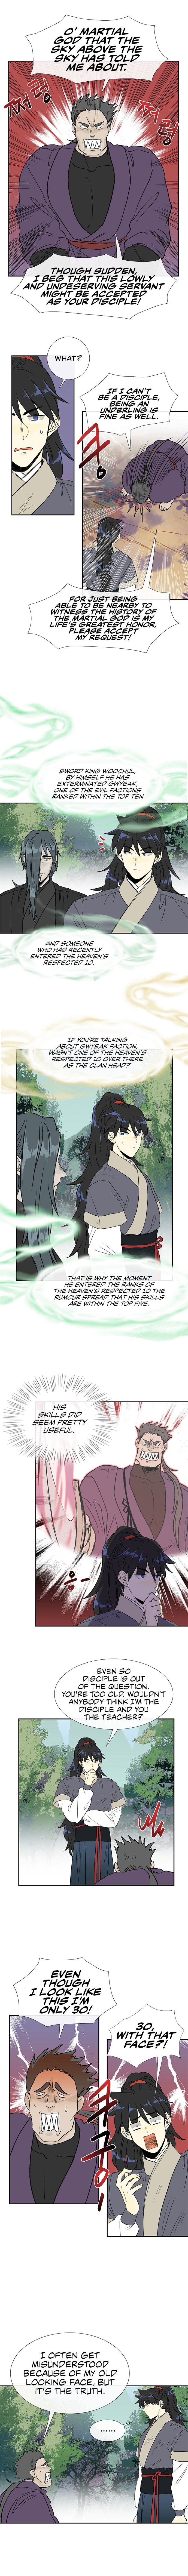 The Scholars Reincarnation Chapter 126 Page 6